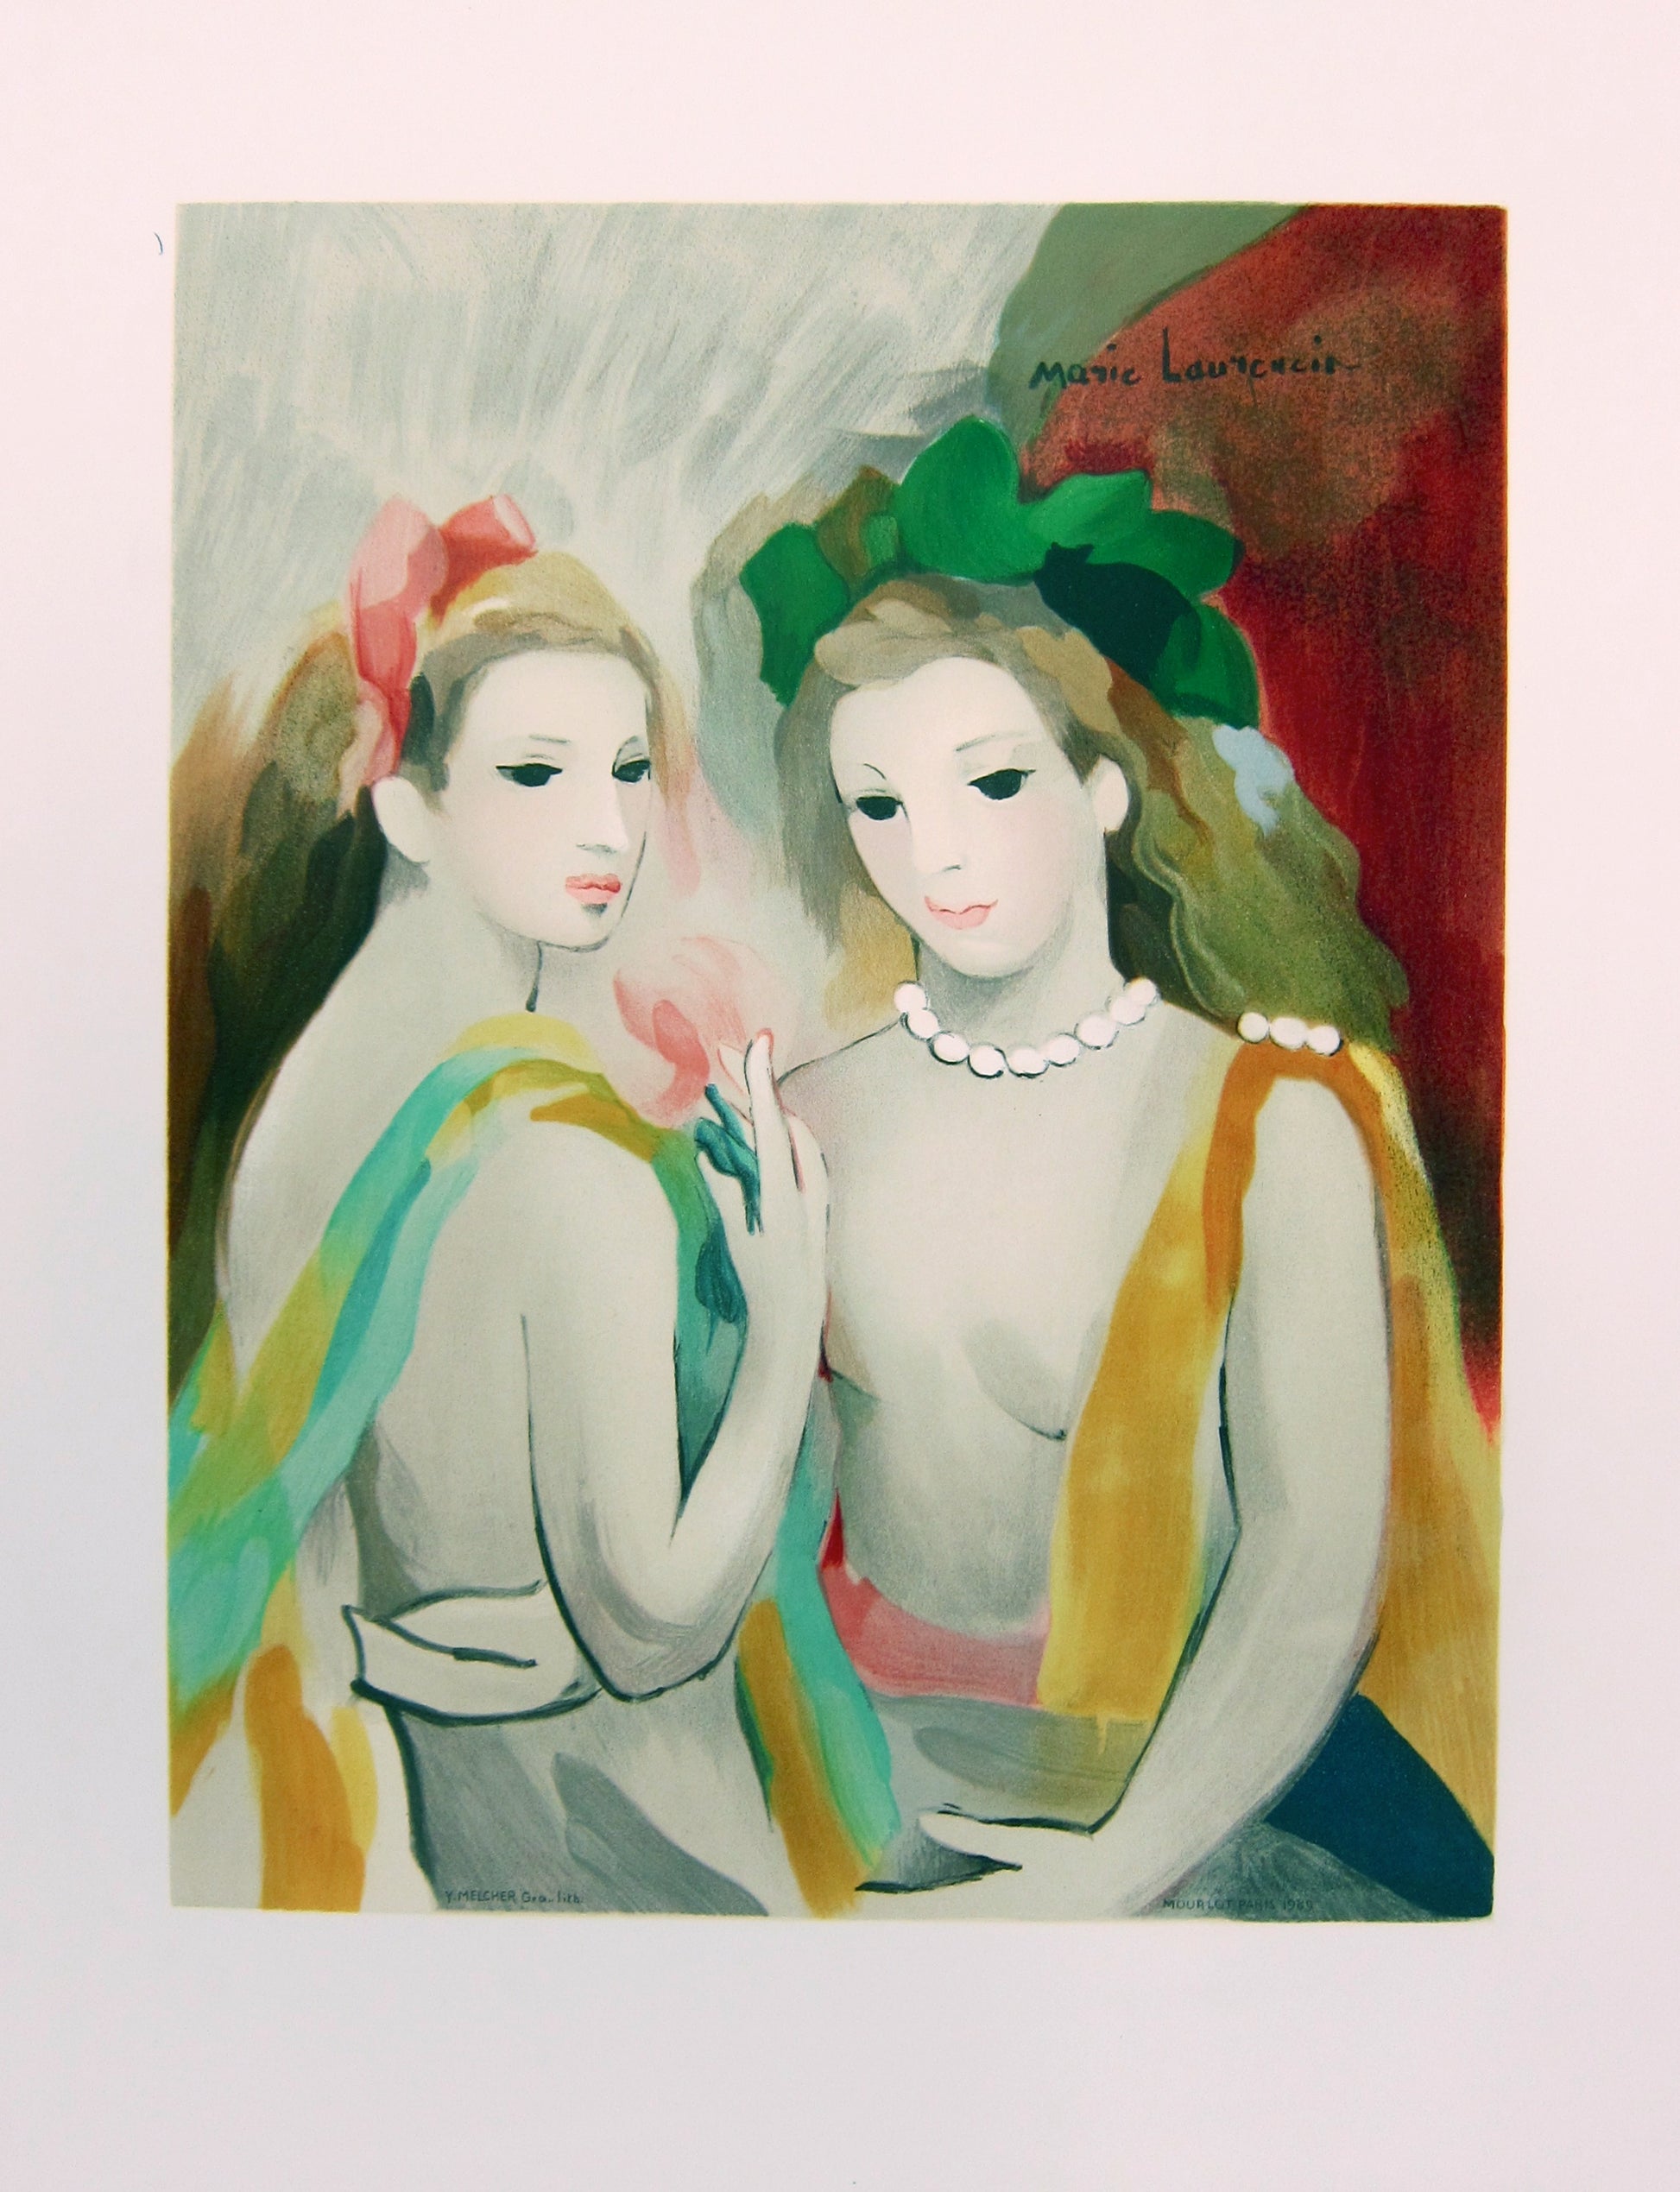 Two Women Posing by Marie Laurencin, 1988 - Mourlot Editions - Fine_Art - Poster - Lithograph - Wall Art - Vintage - Prints - Original